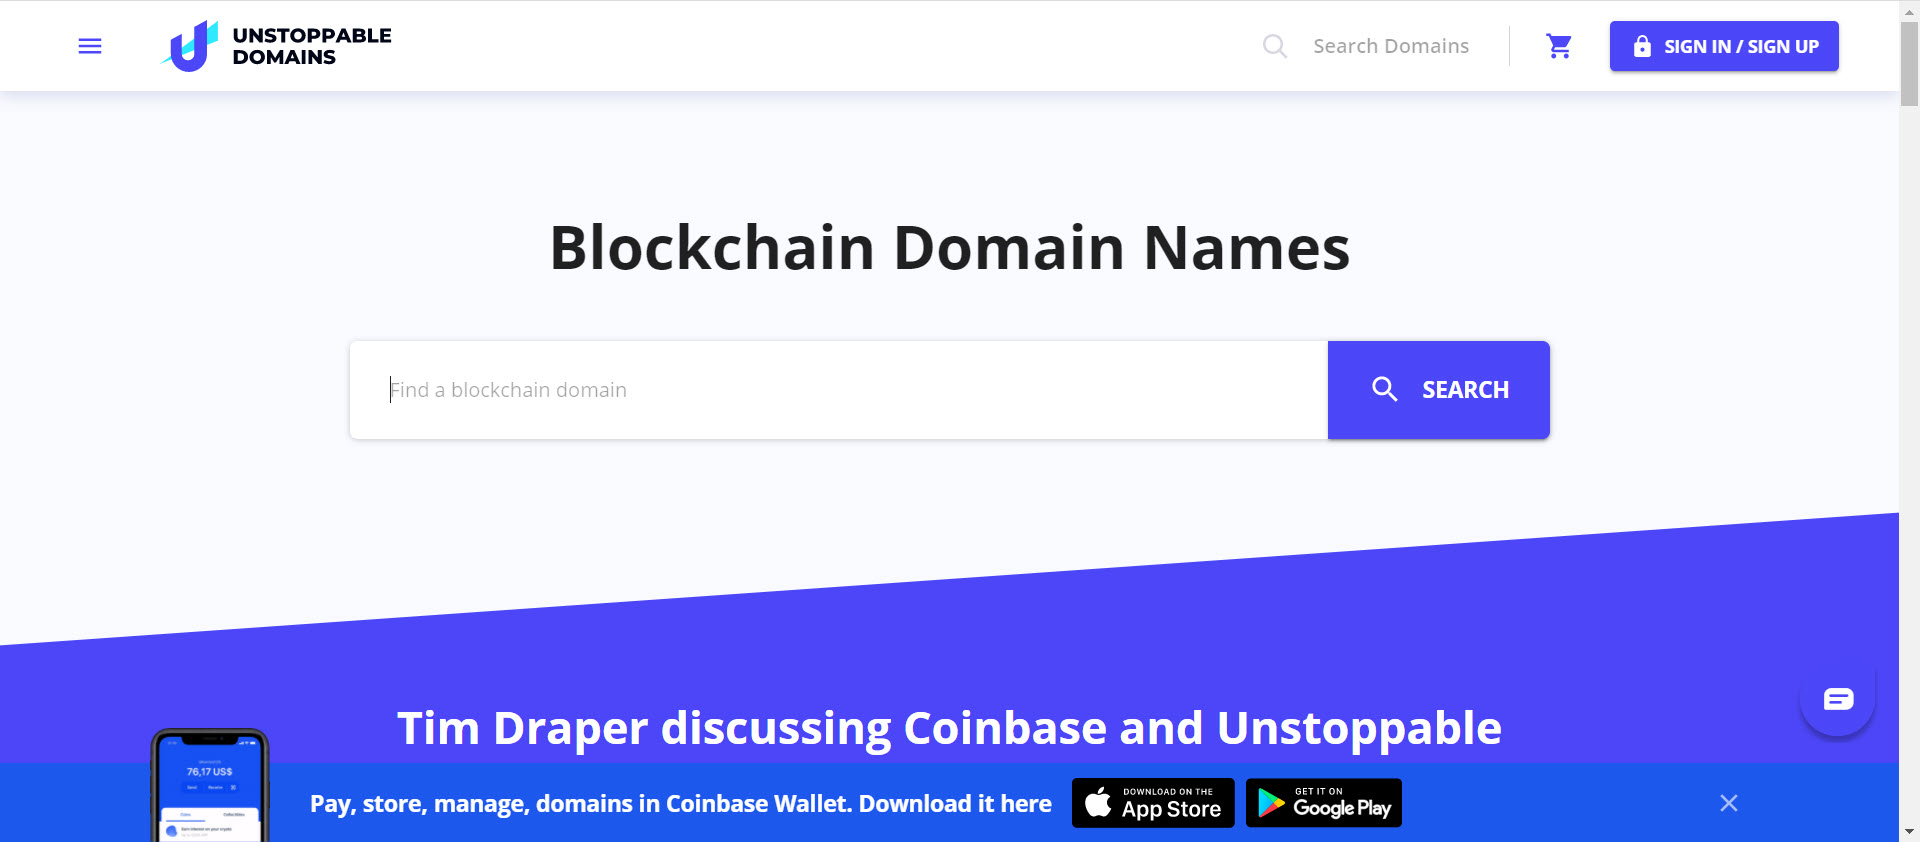 Crypto affiliate programs - Unstoppable Domains